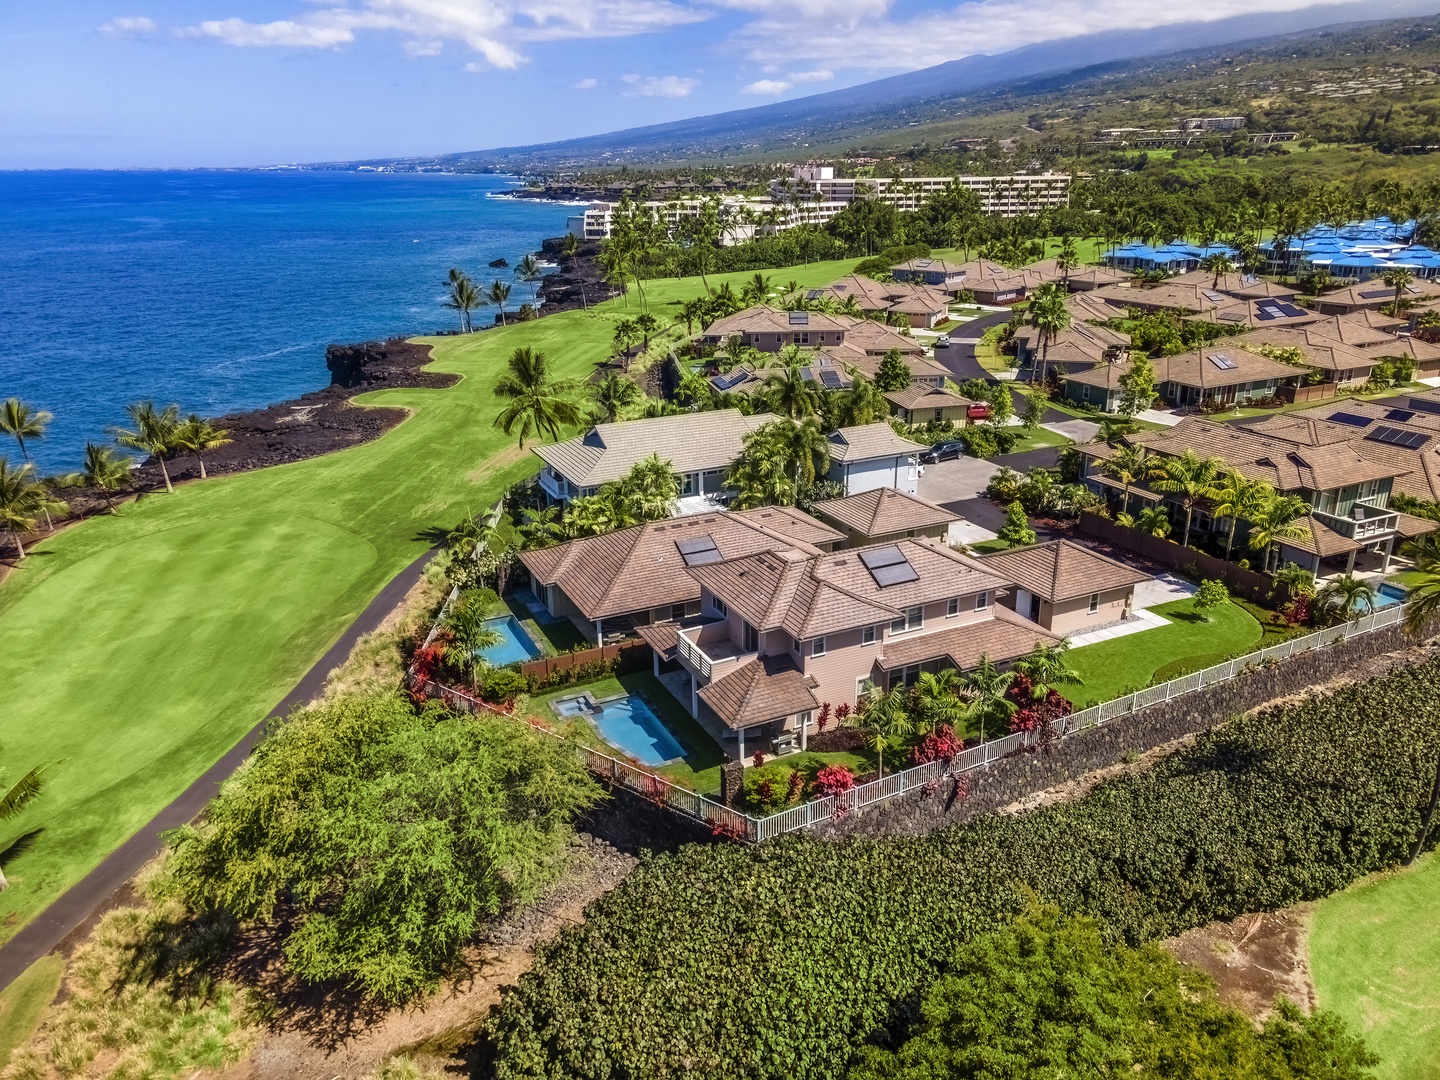 Kailua Kona Vacation Rentals, Green/Blue Combo - Zoomed out aerial view